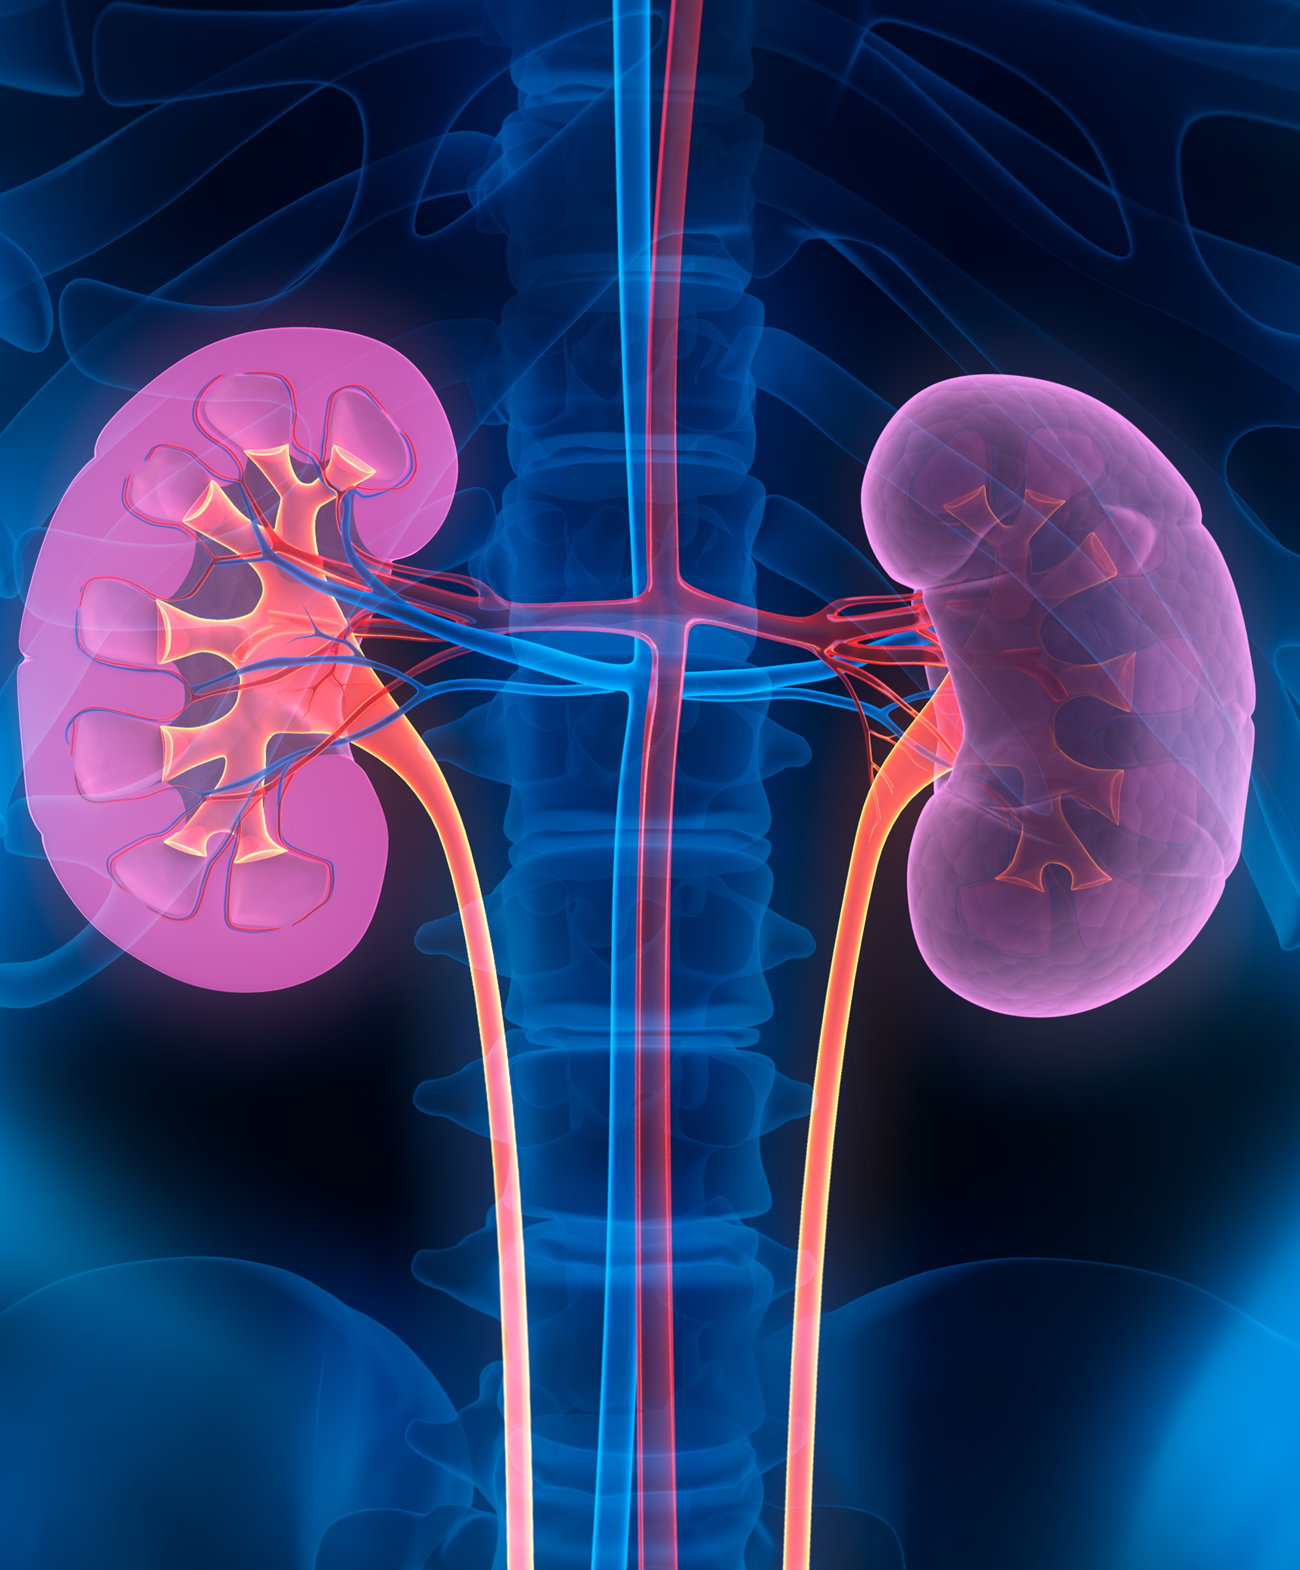 colorized x-ray-like image of the kidneys